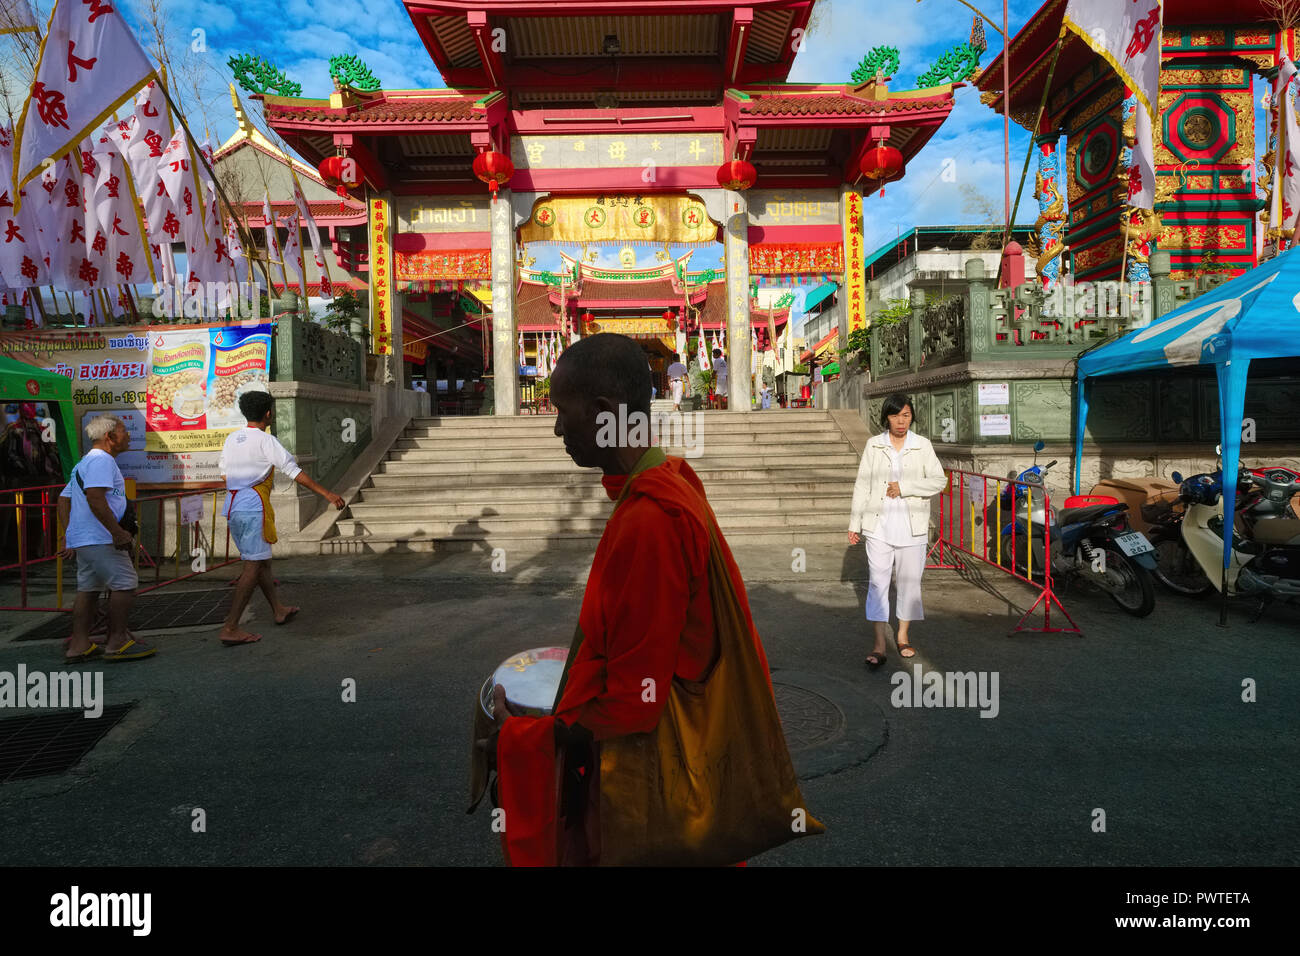 A Thai Buddhist monk passes the Taoist Jui Tui Temple in Phuket Town, Phuket, Thailand, on his early morning alms round, the alms bowl in his hands Stock Photo